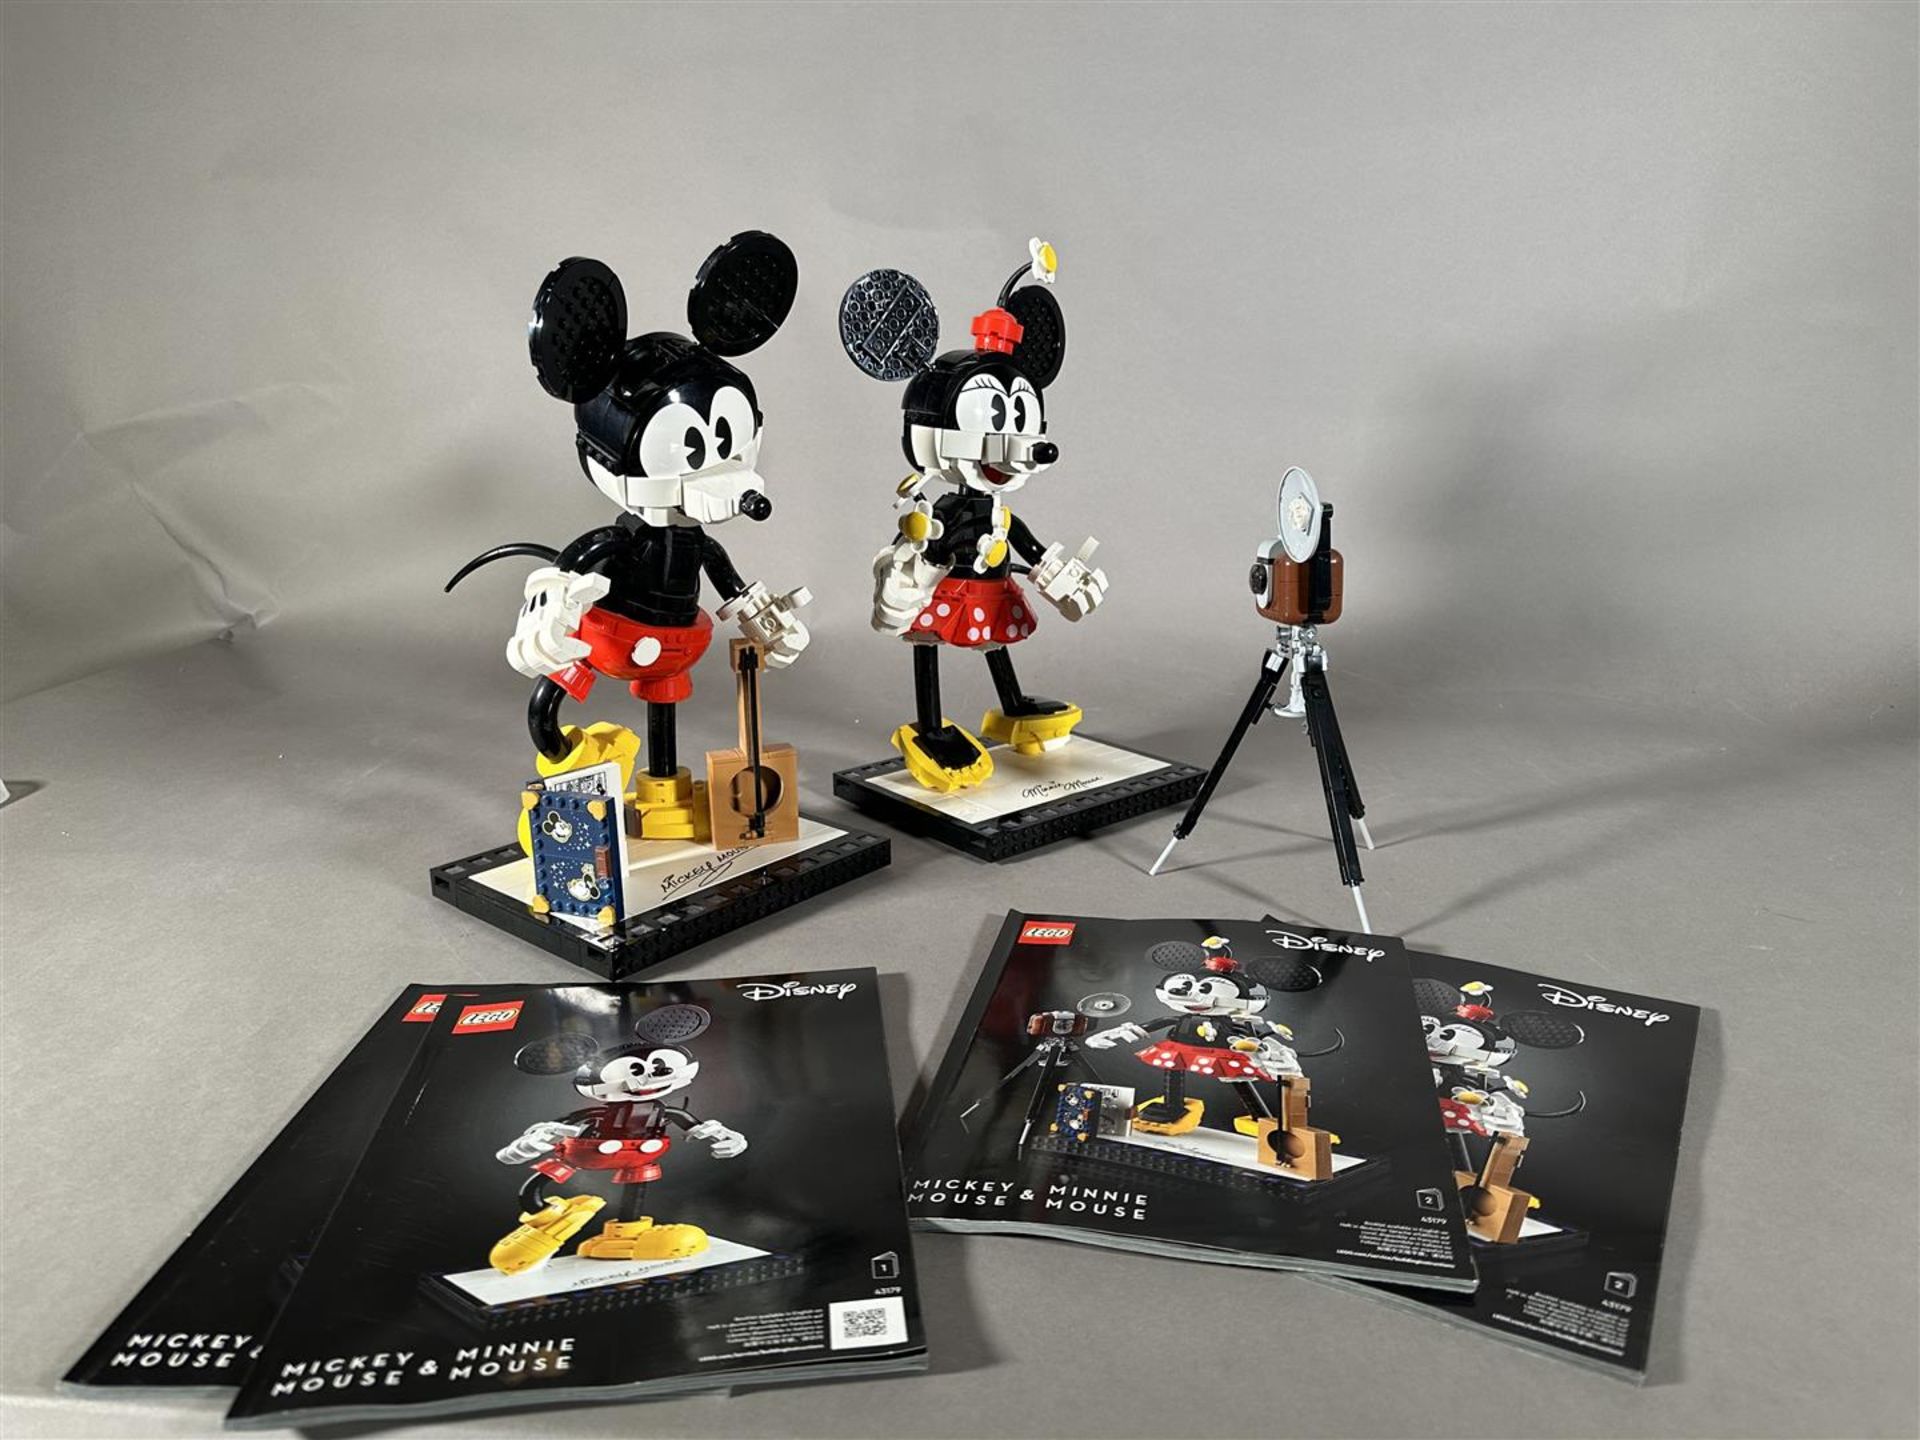 Lego Disney 43179 Mickey & Minnie Mouse. - Image 2 of 6